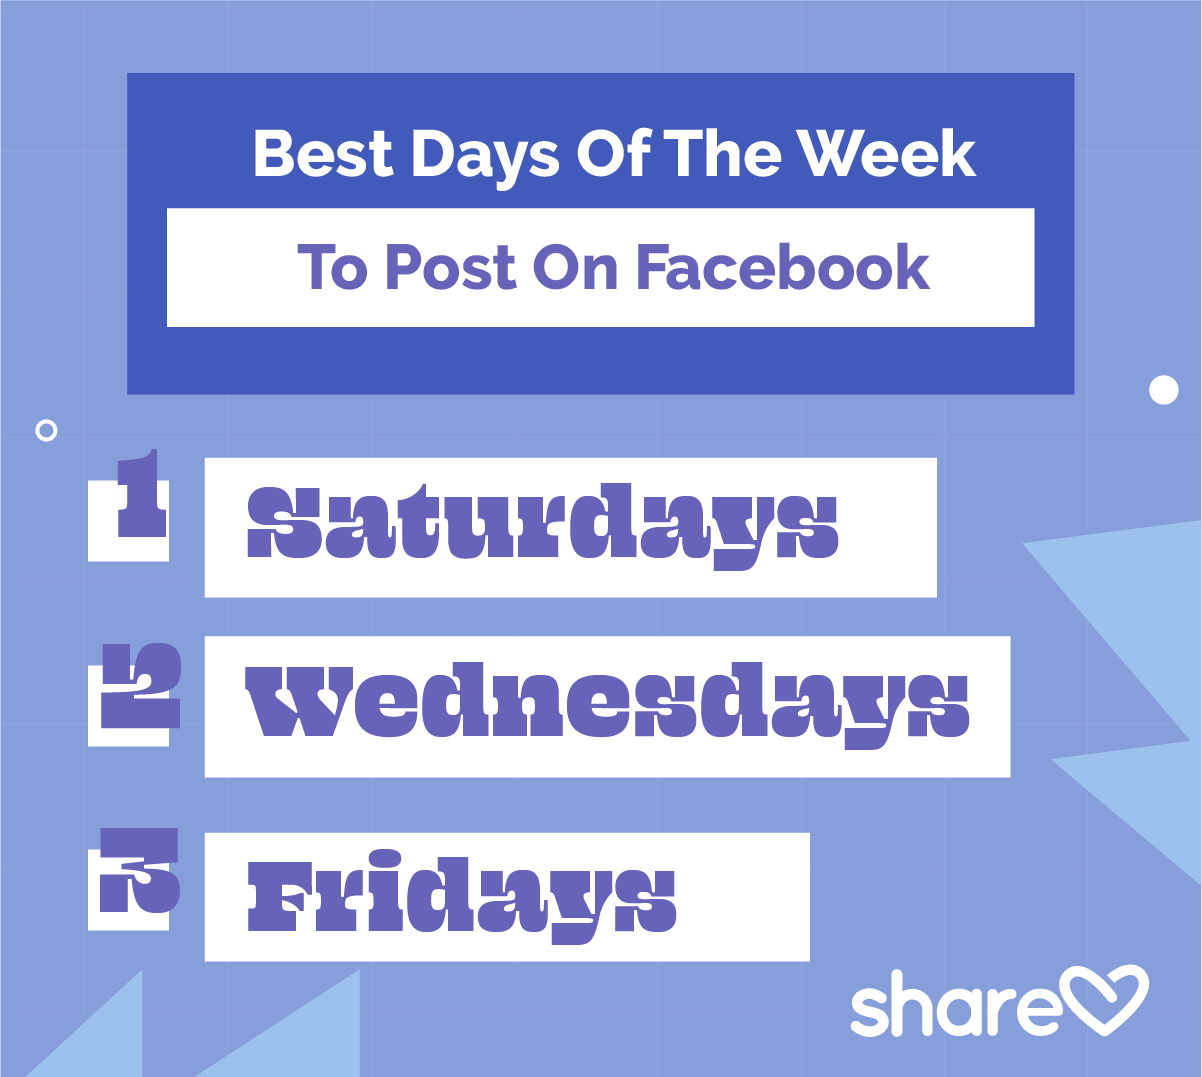 Best Days Of The Week To Post On Facebook